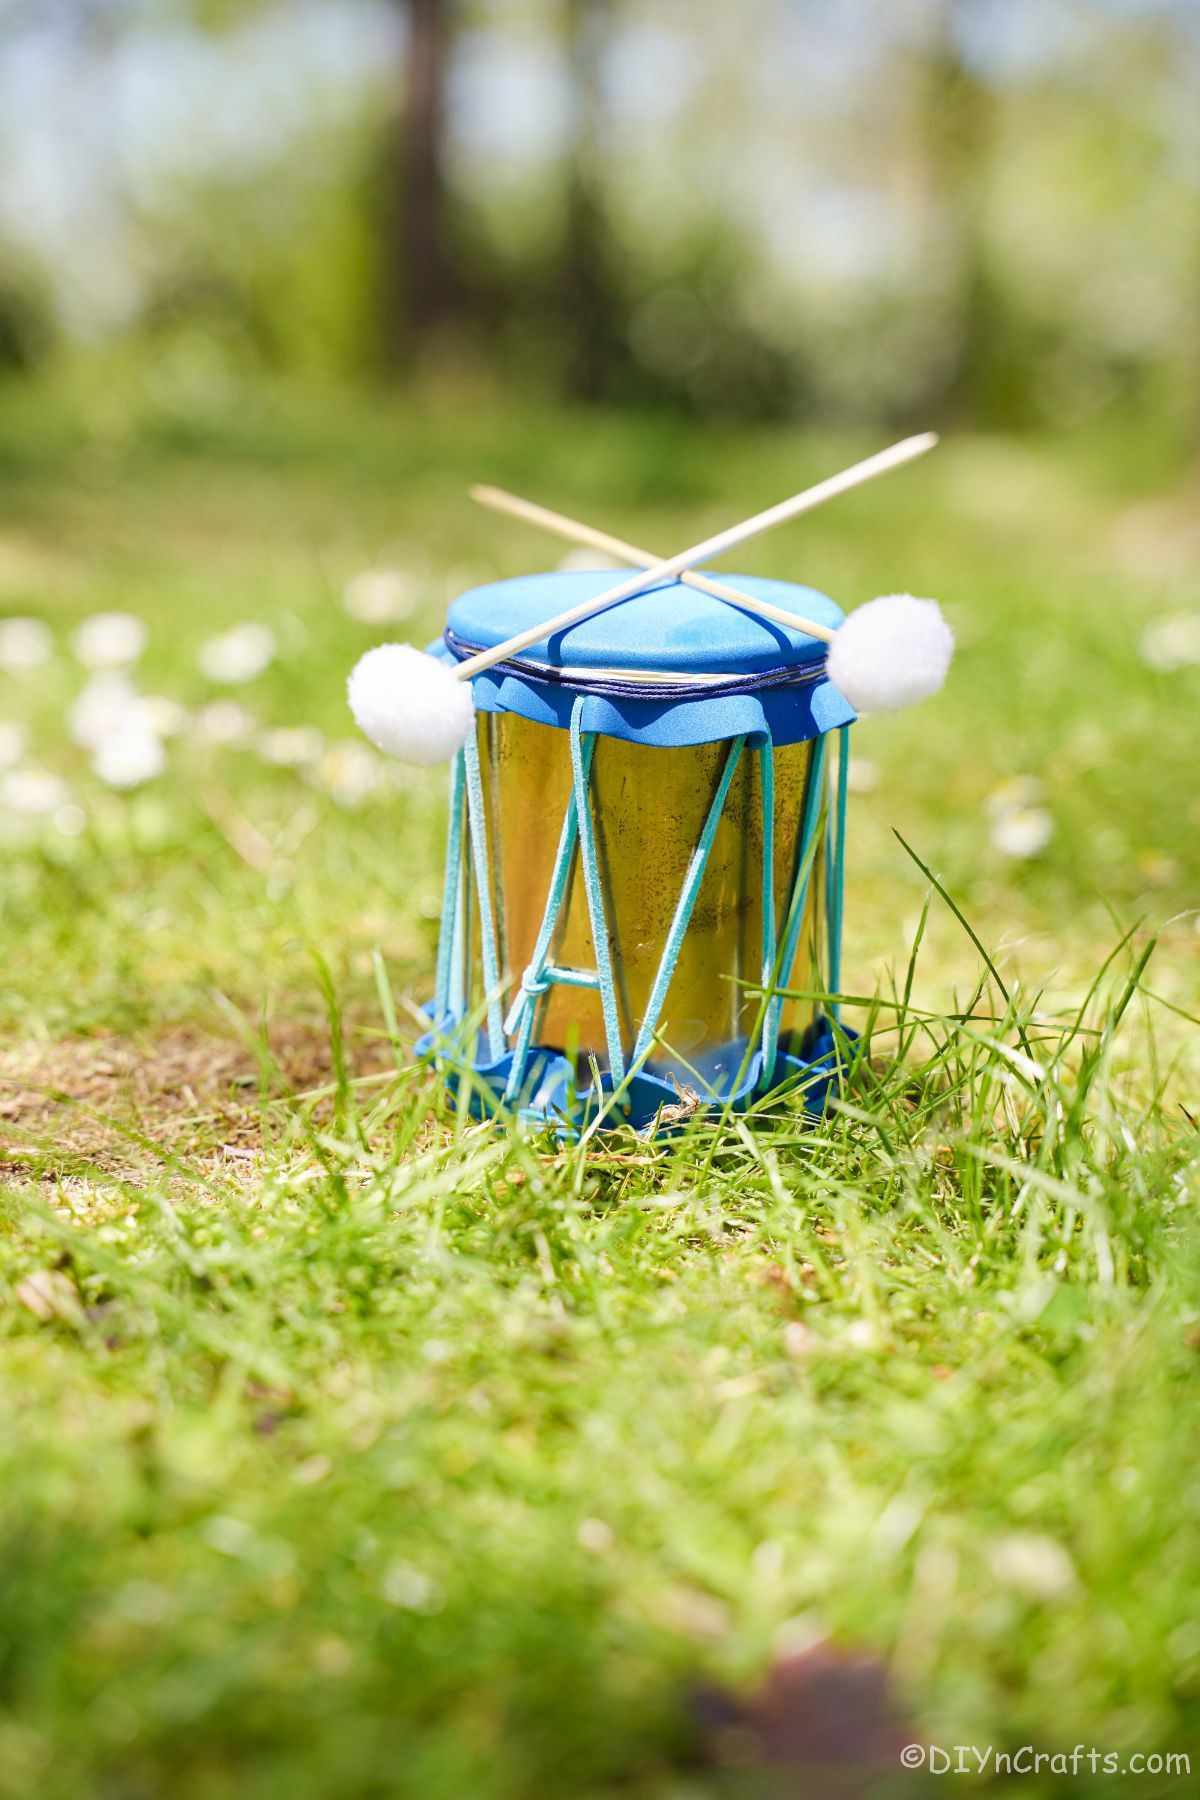 gold and blue mini drum with sticks on grass